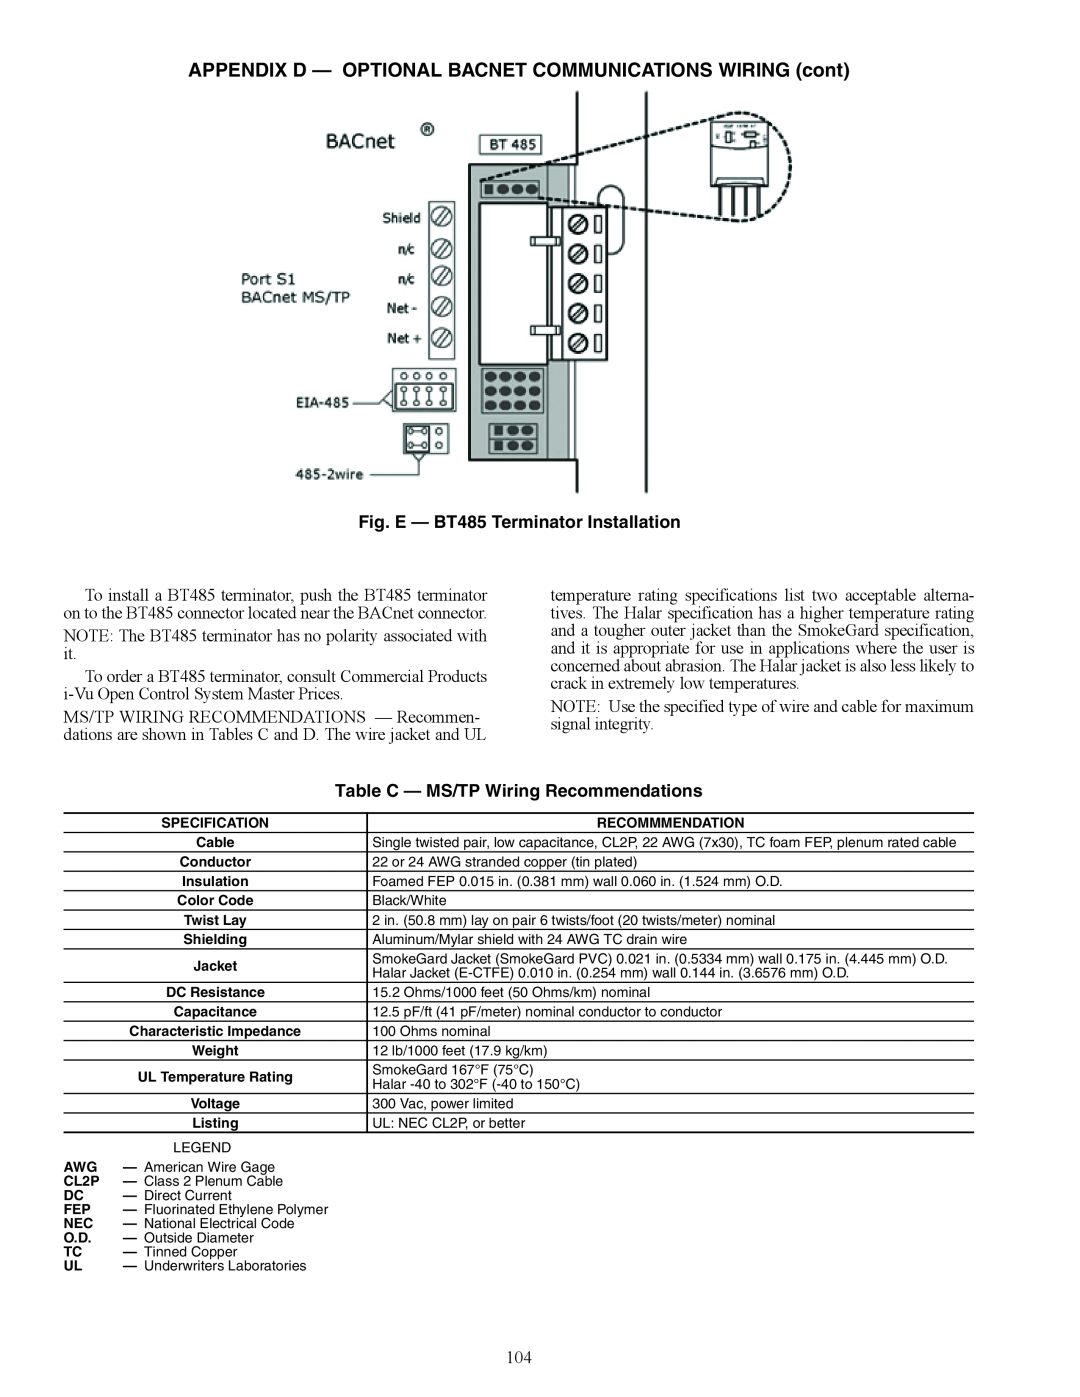 Carrier 30RAP010-060 specifications Fig. E — BT485 Terminator Installation, Table C — MS/TP Wiring Recommendations 